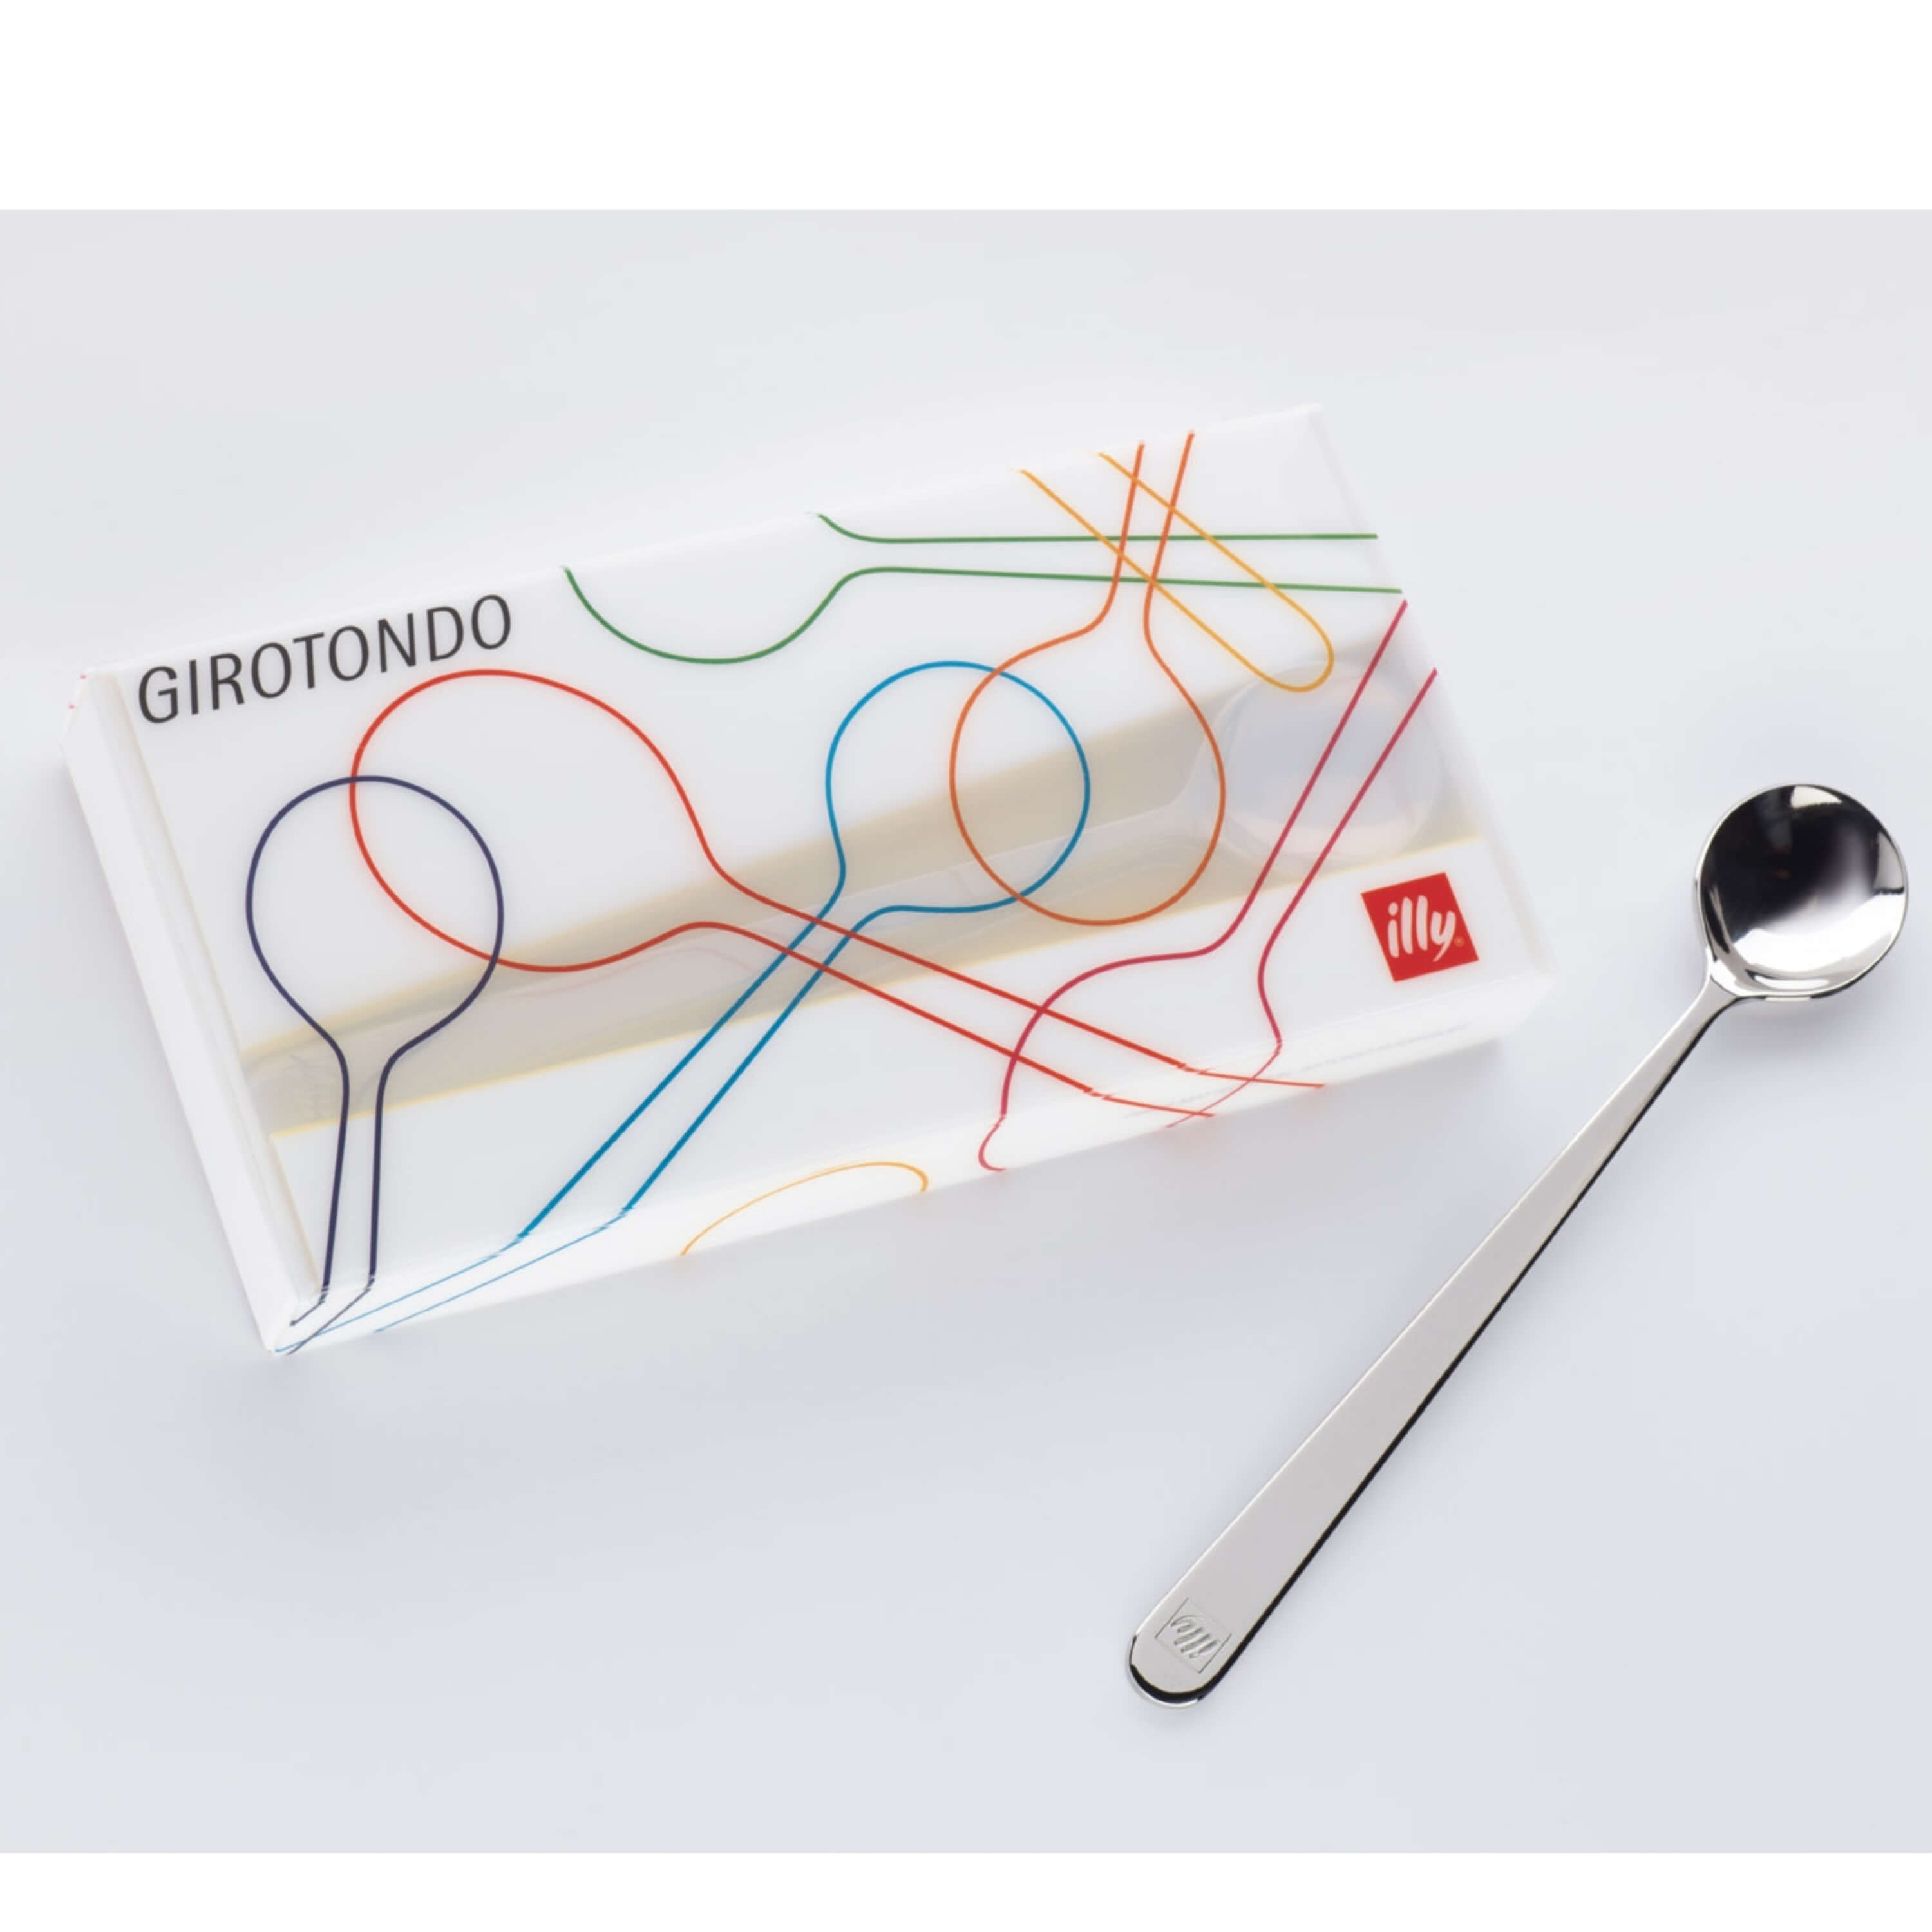 Pack of illy Girotondo Spoons BIG (6 pcs), Coffee Accessories, 02-06-0052